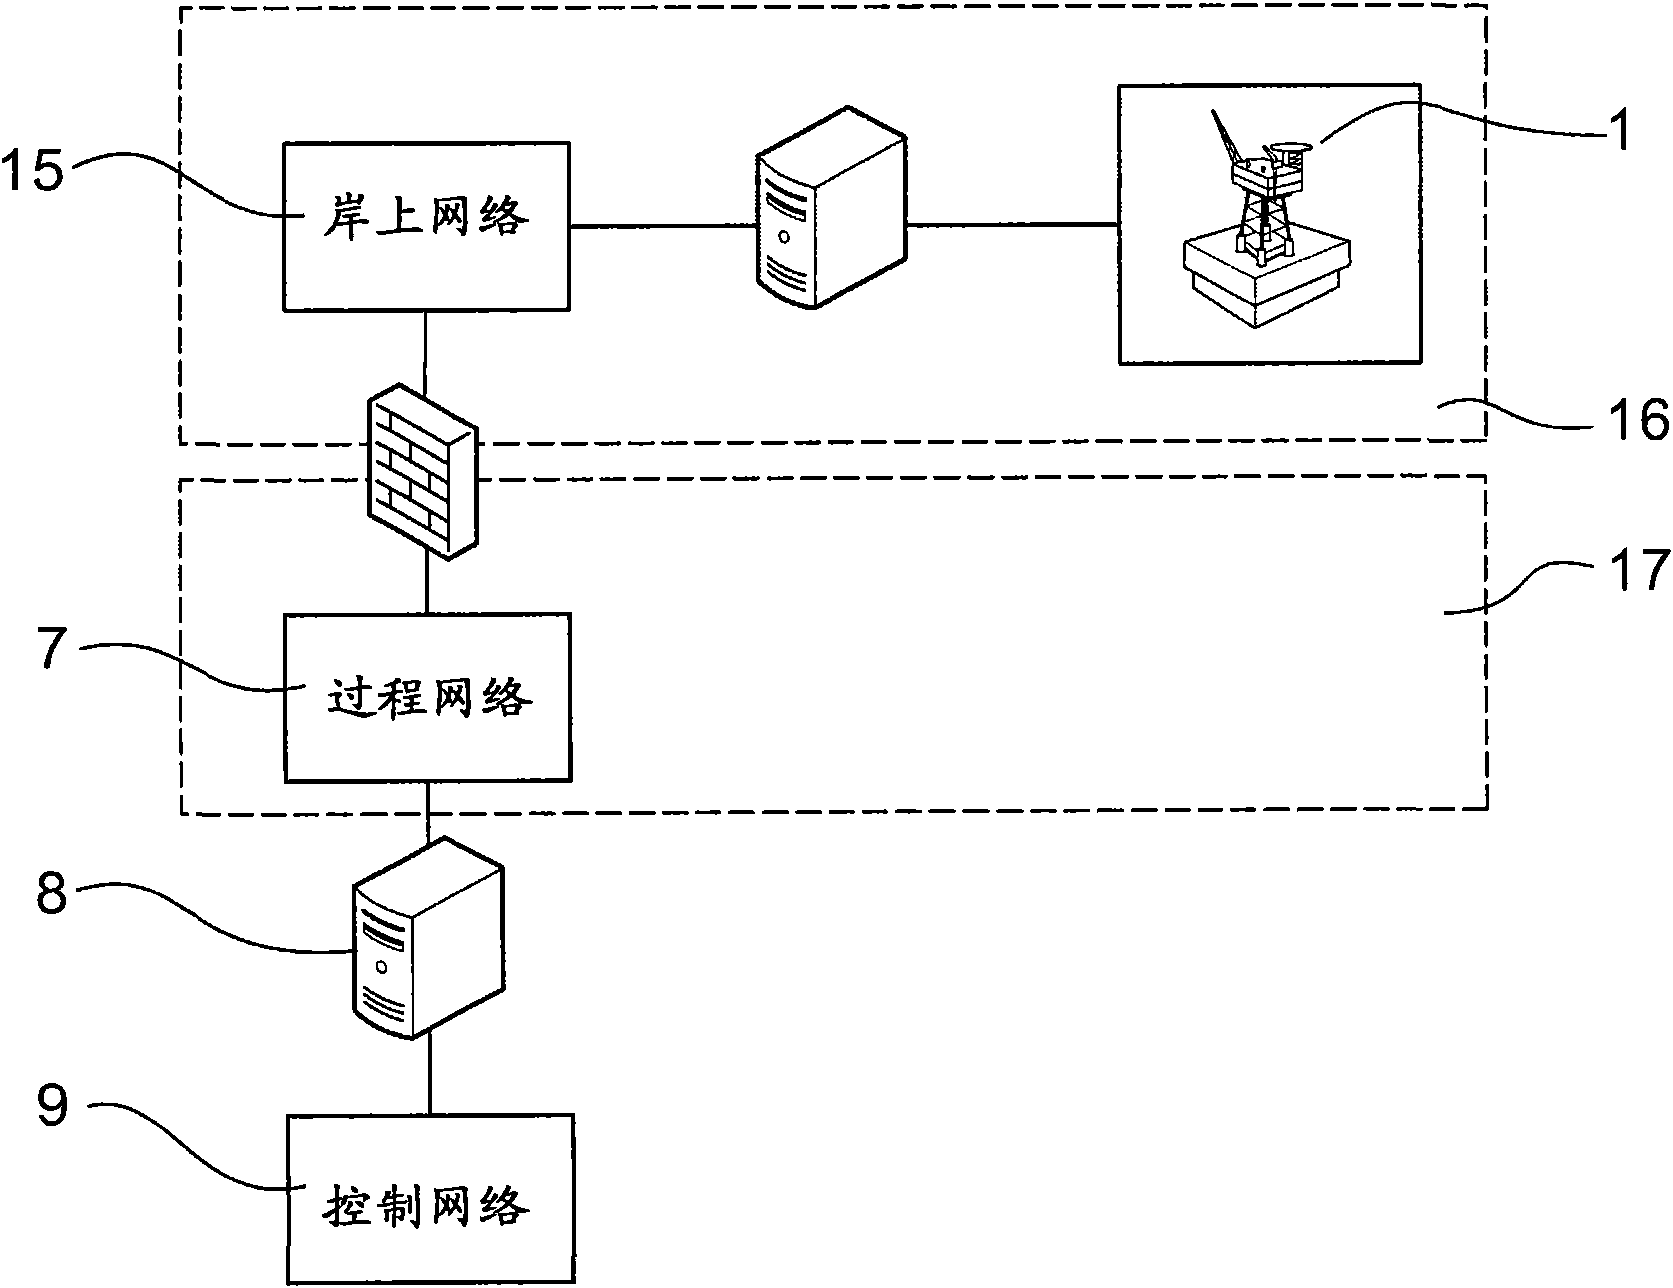 A computer implemented method to display technical data for monitoring an industrial installation